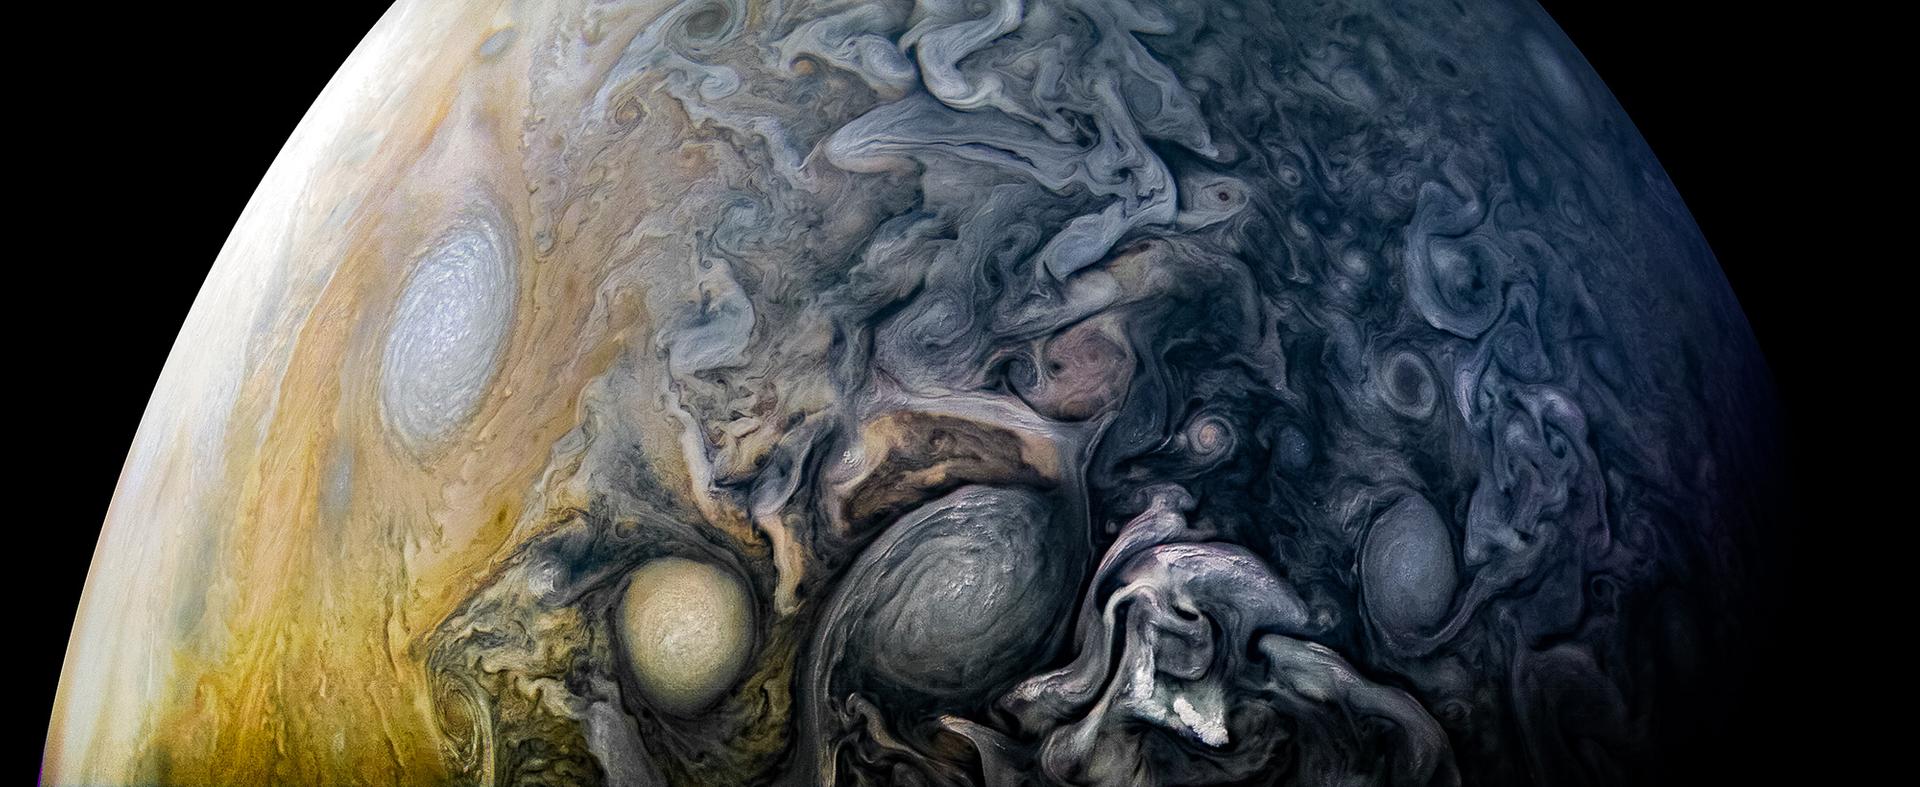 Jupiter's northern hemisphere comes alive with Juno color enhancement showing intricate cloud formations.